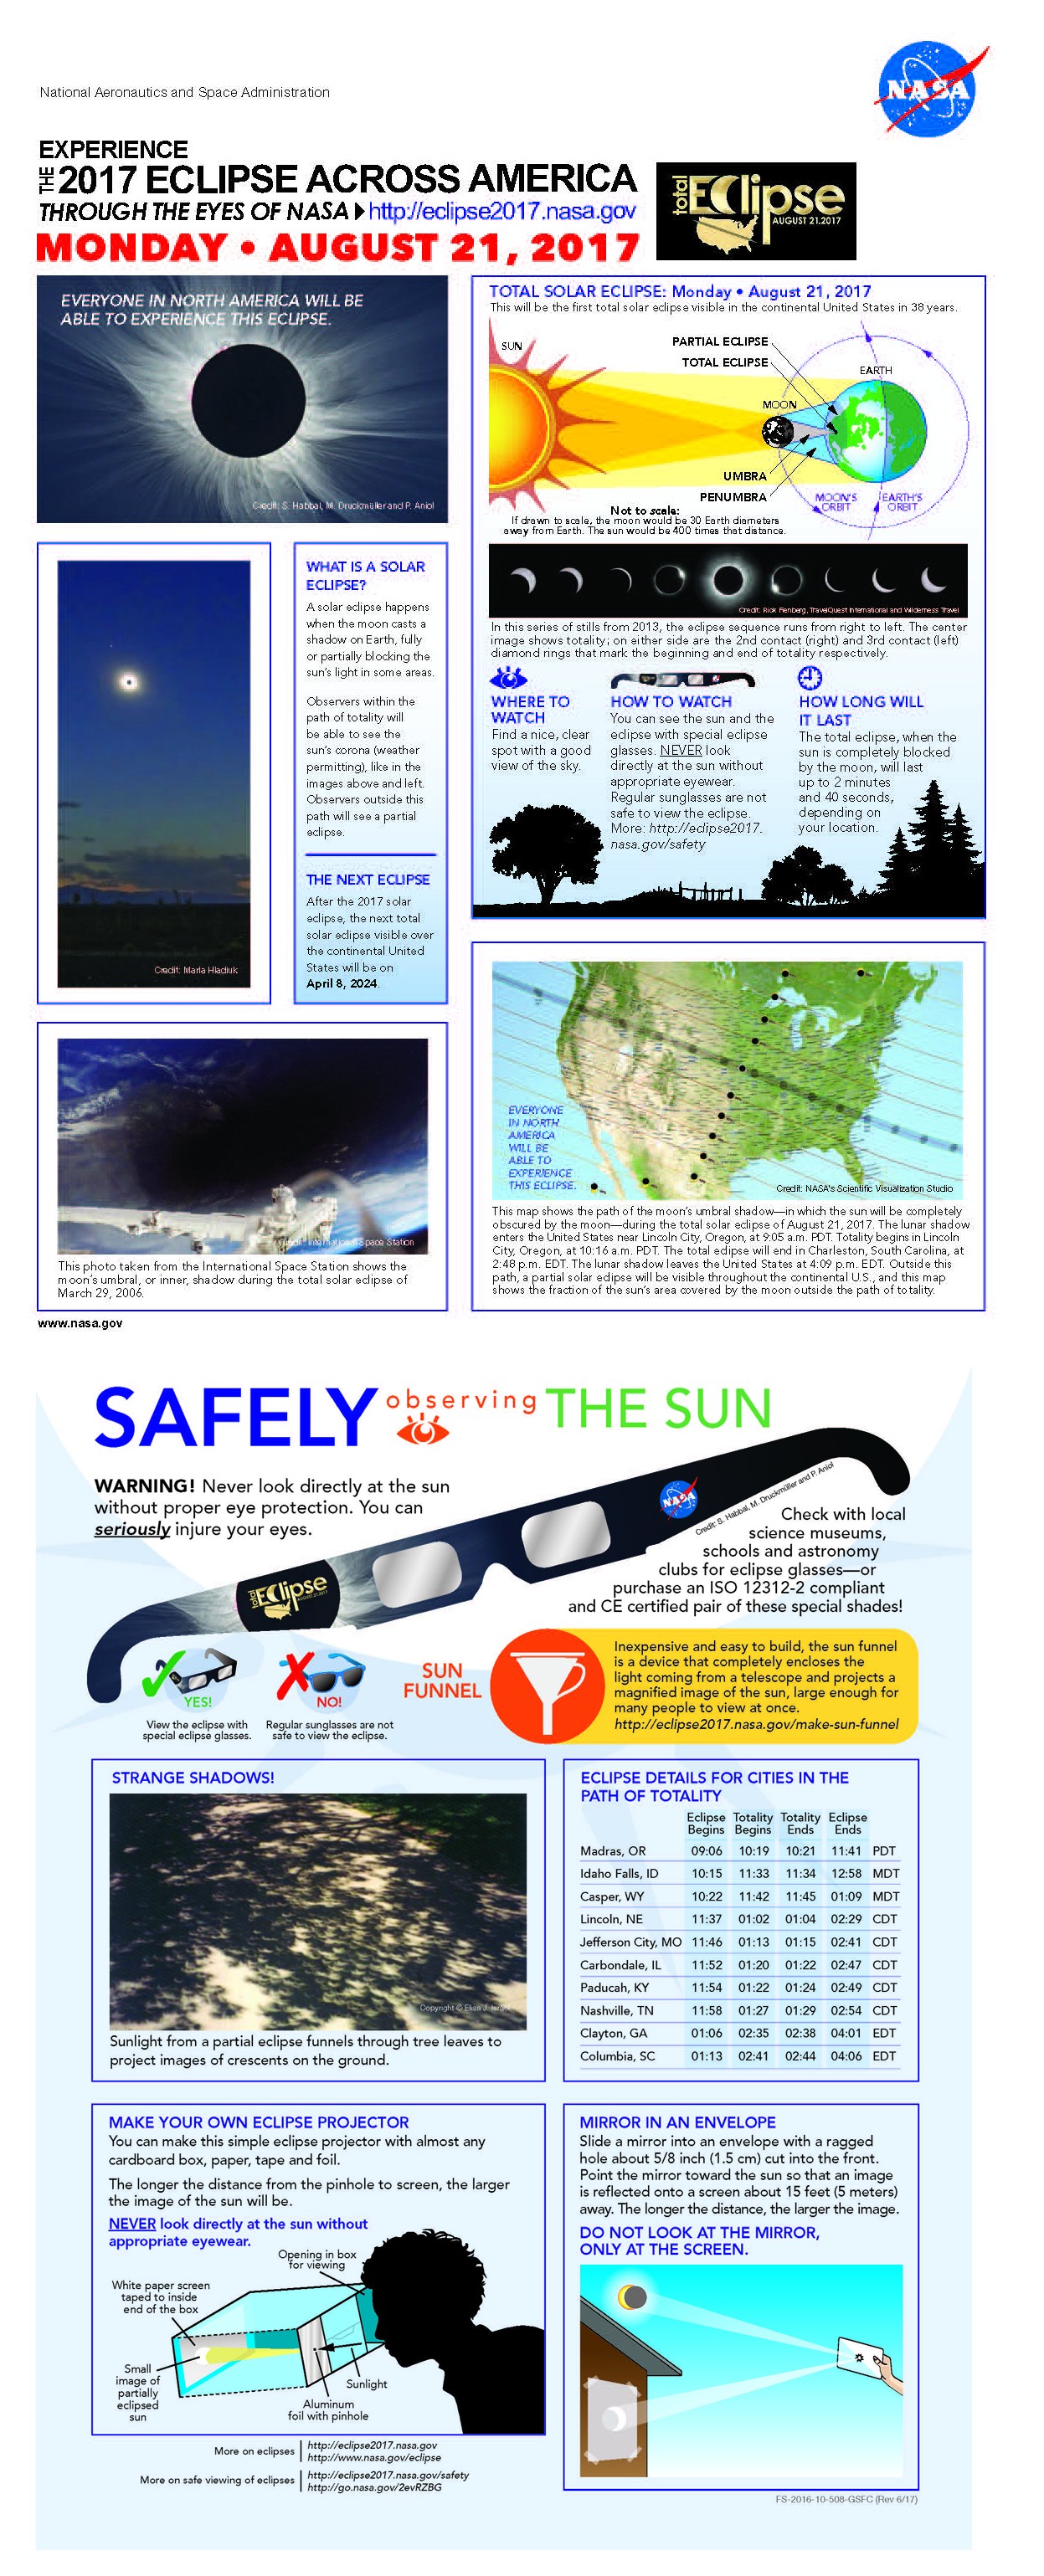 Historic solar eclipse comes with dangers Article The United States